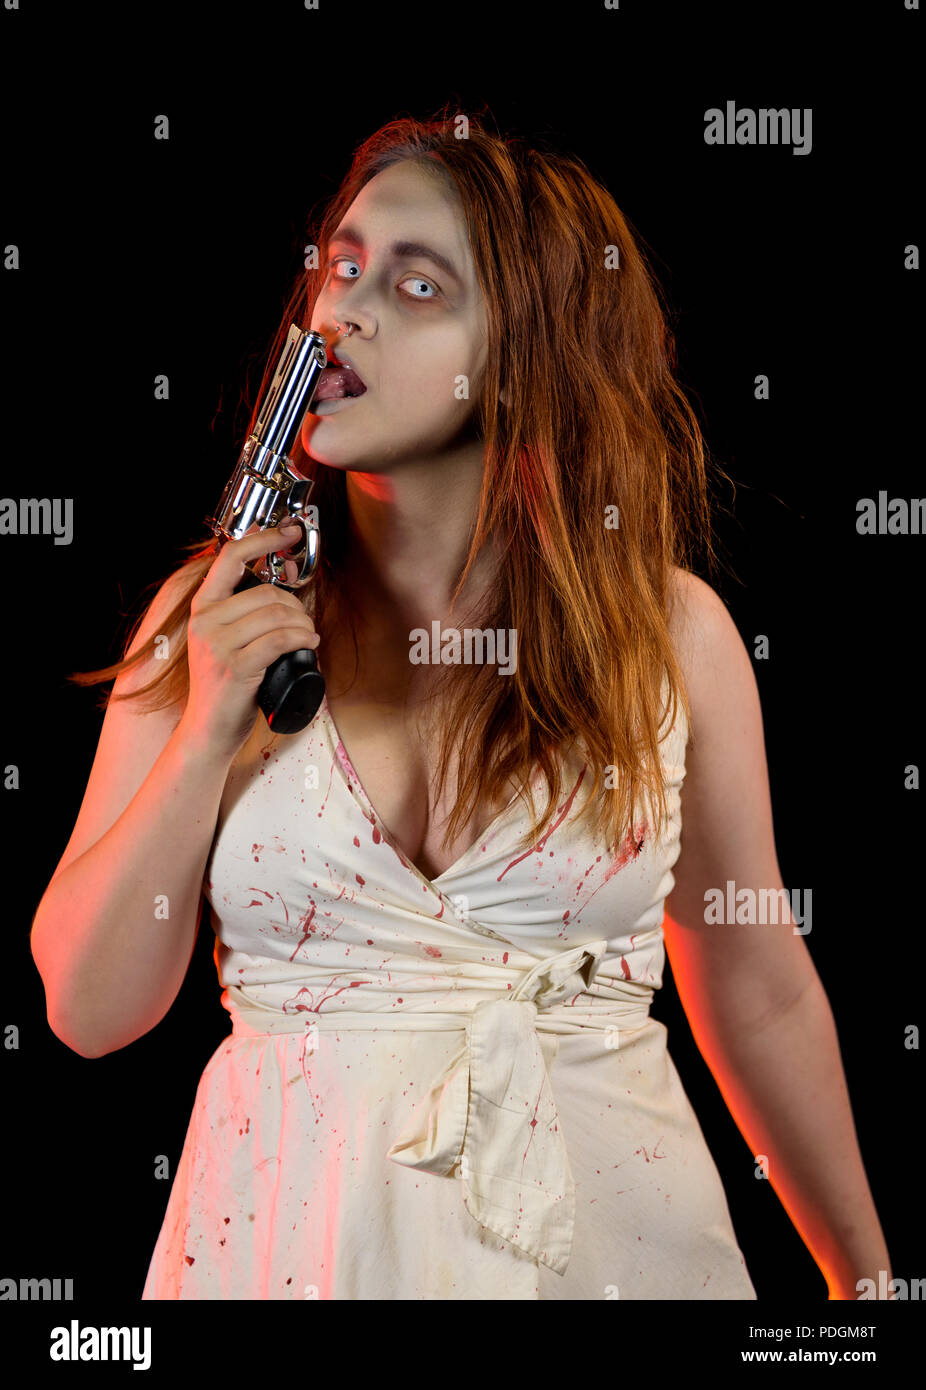 A caucasian female model as an undead character holding a revolver pistol. Model is wearing a white dress and has custom theatrical makeup. Shot again Stock Photo